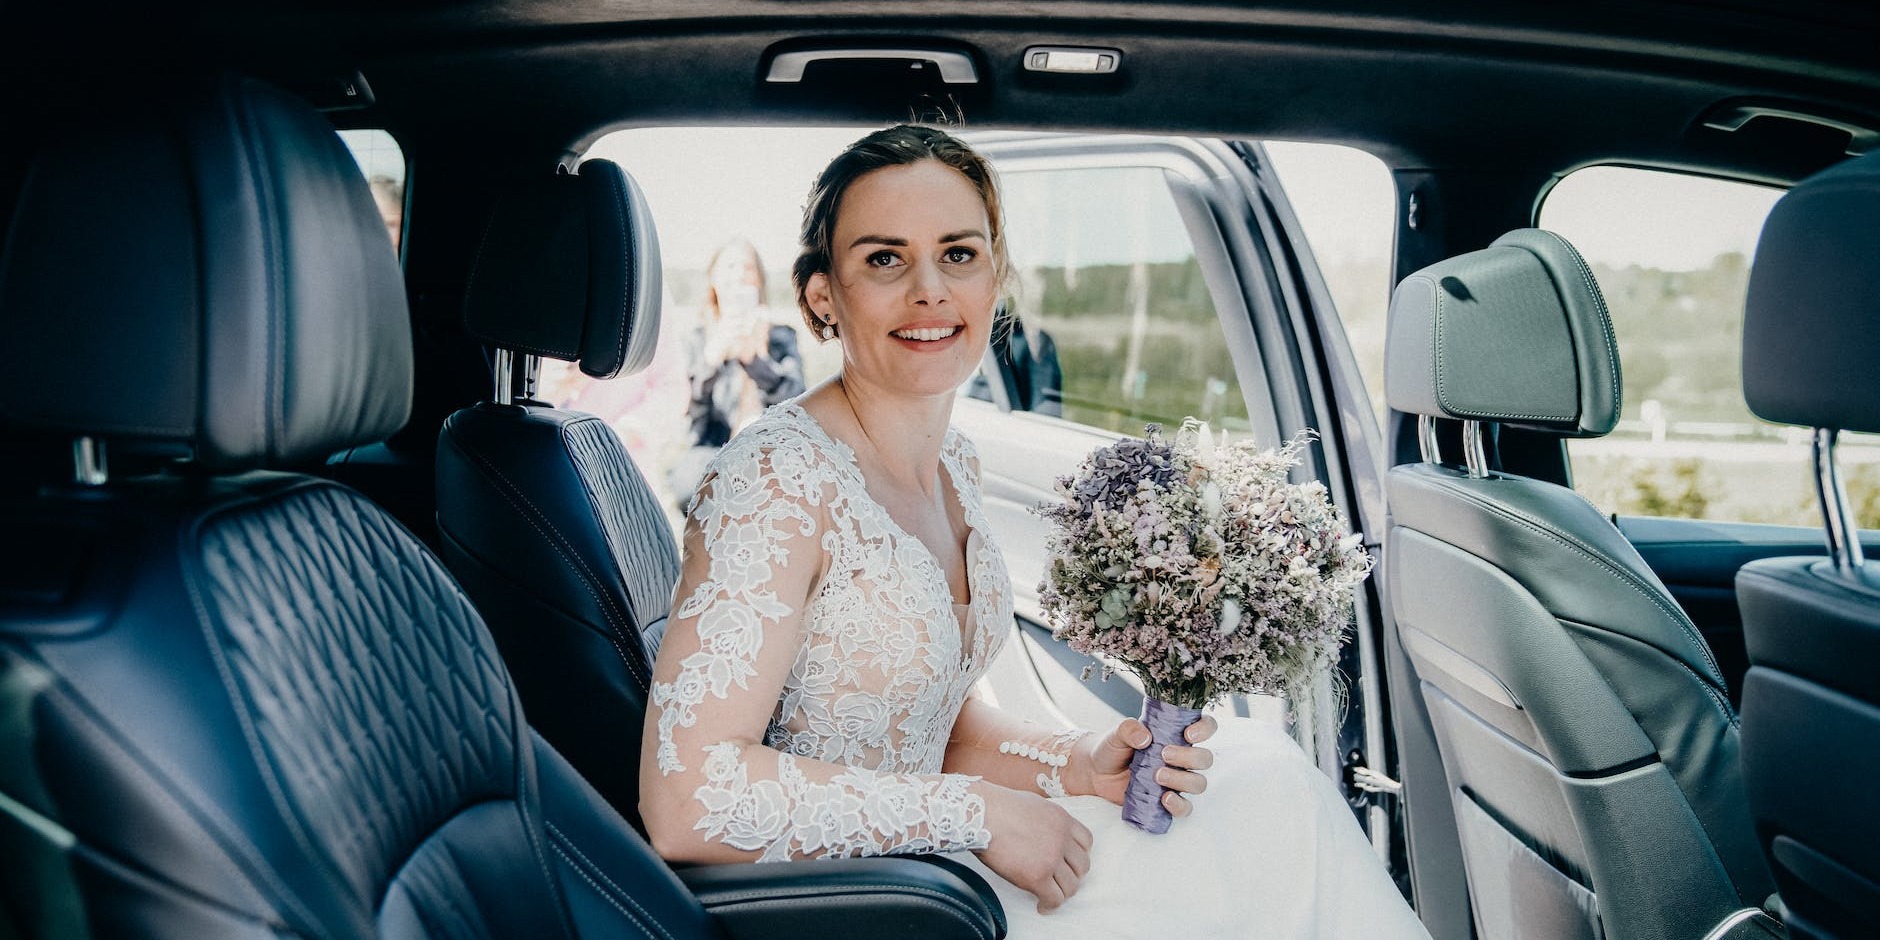 How to Find Affordable Wedding Cars in Greater London